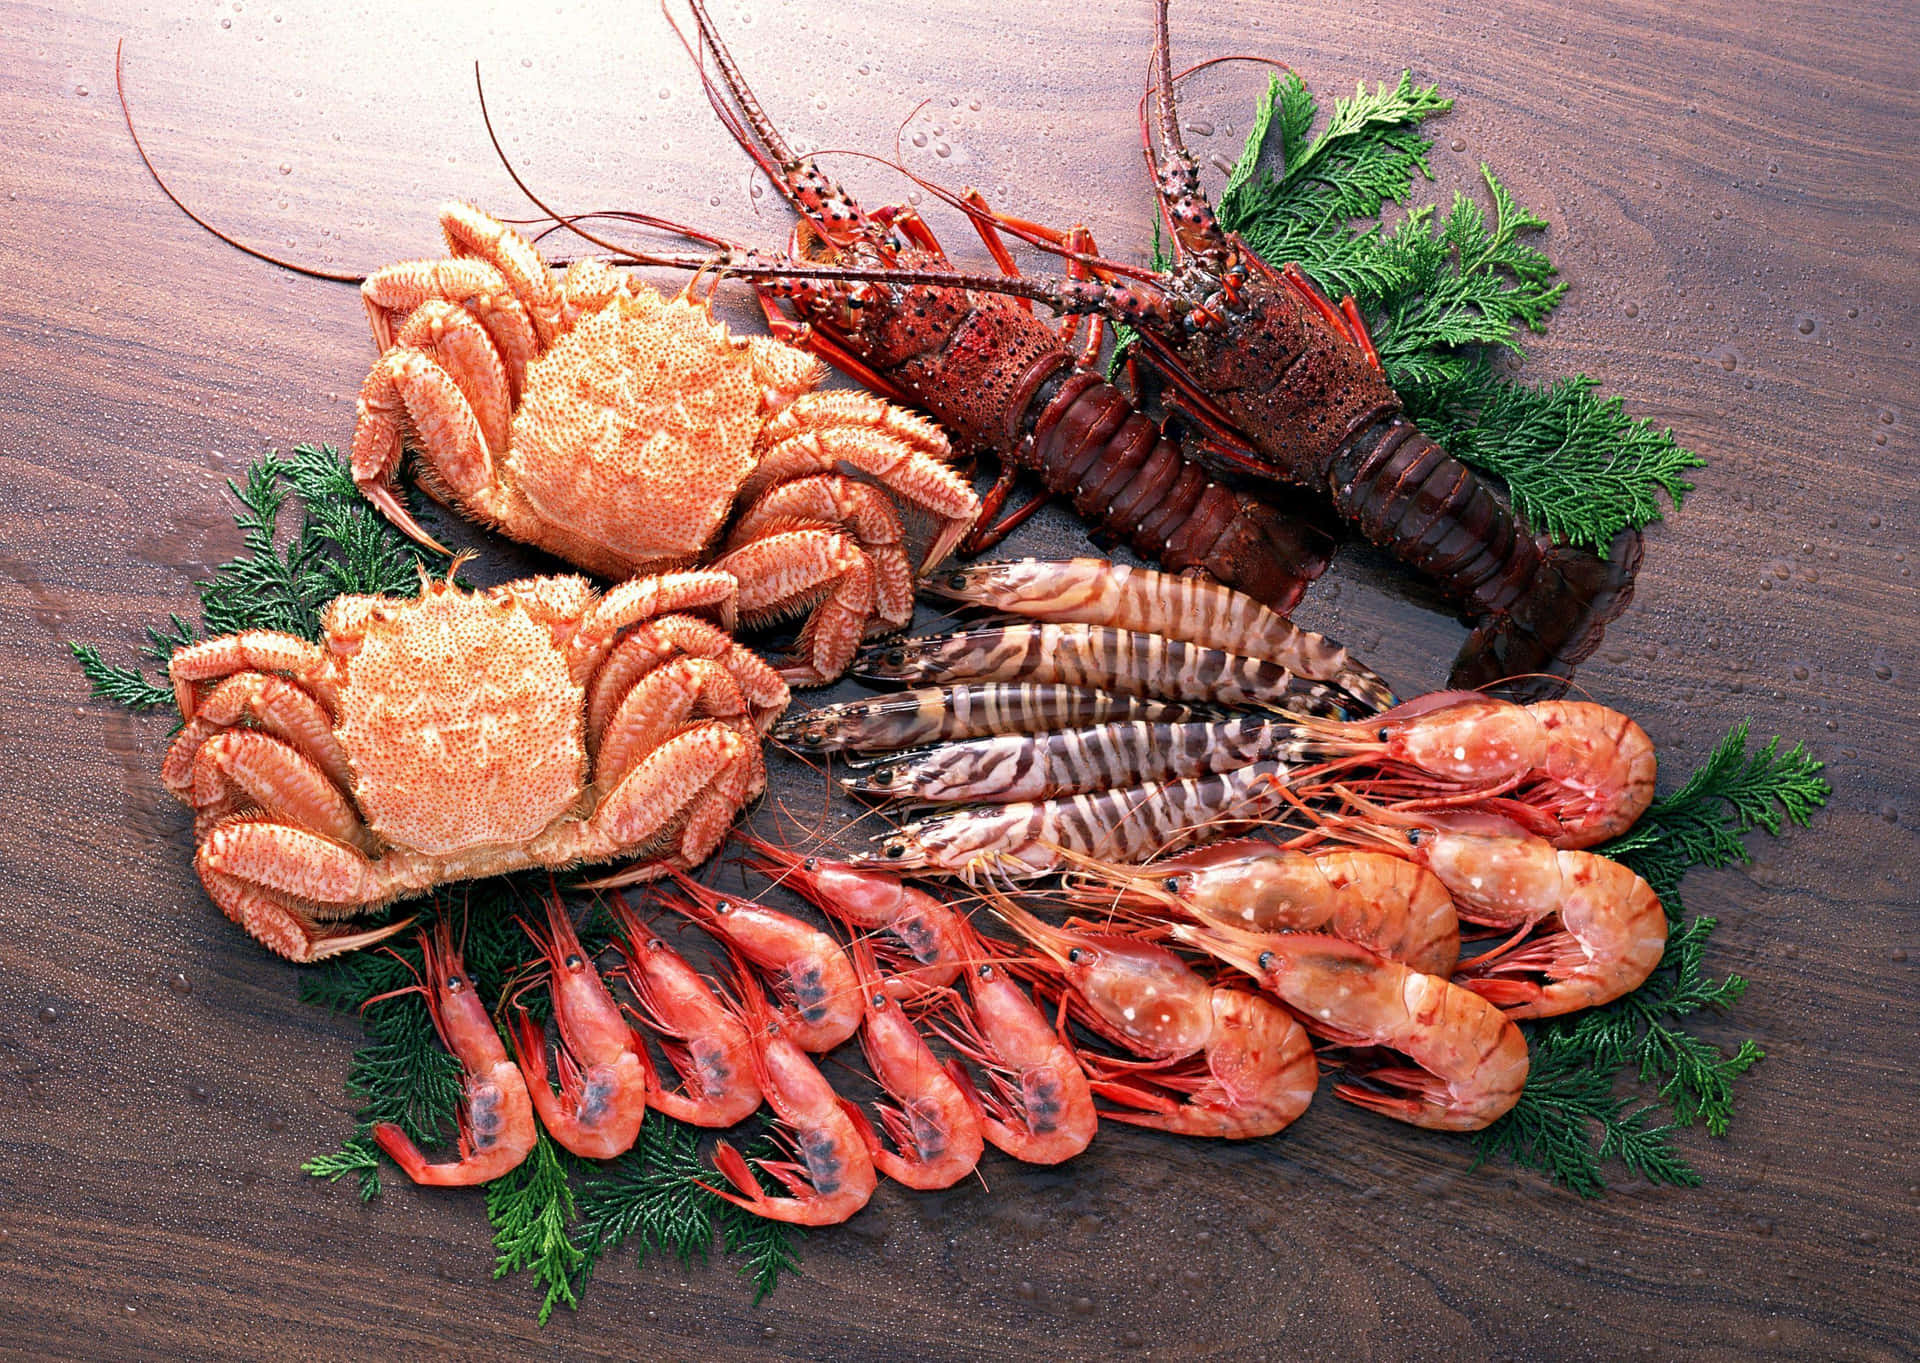 Dive into the world of delicious seafood!